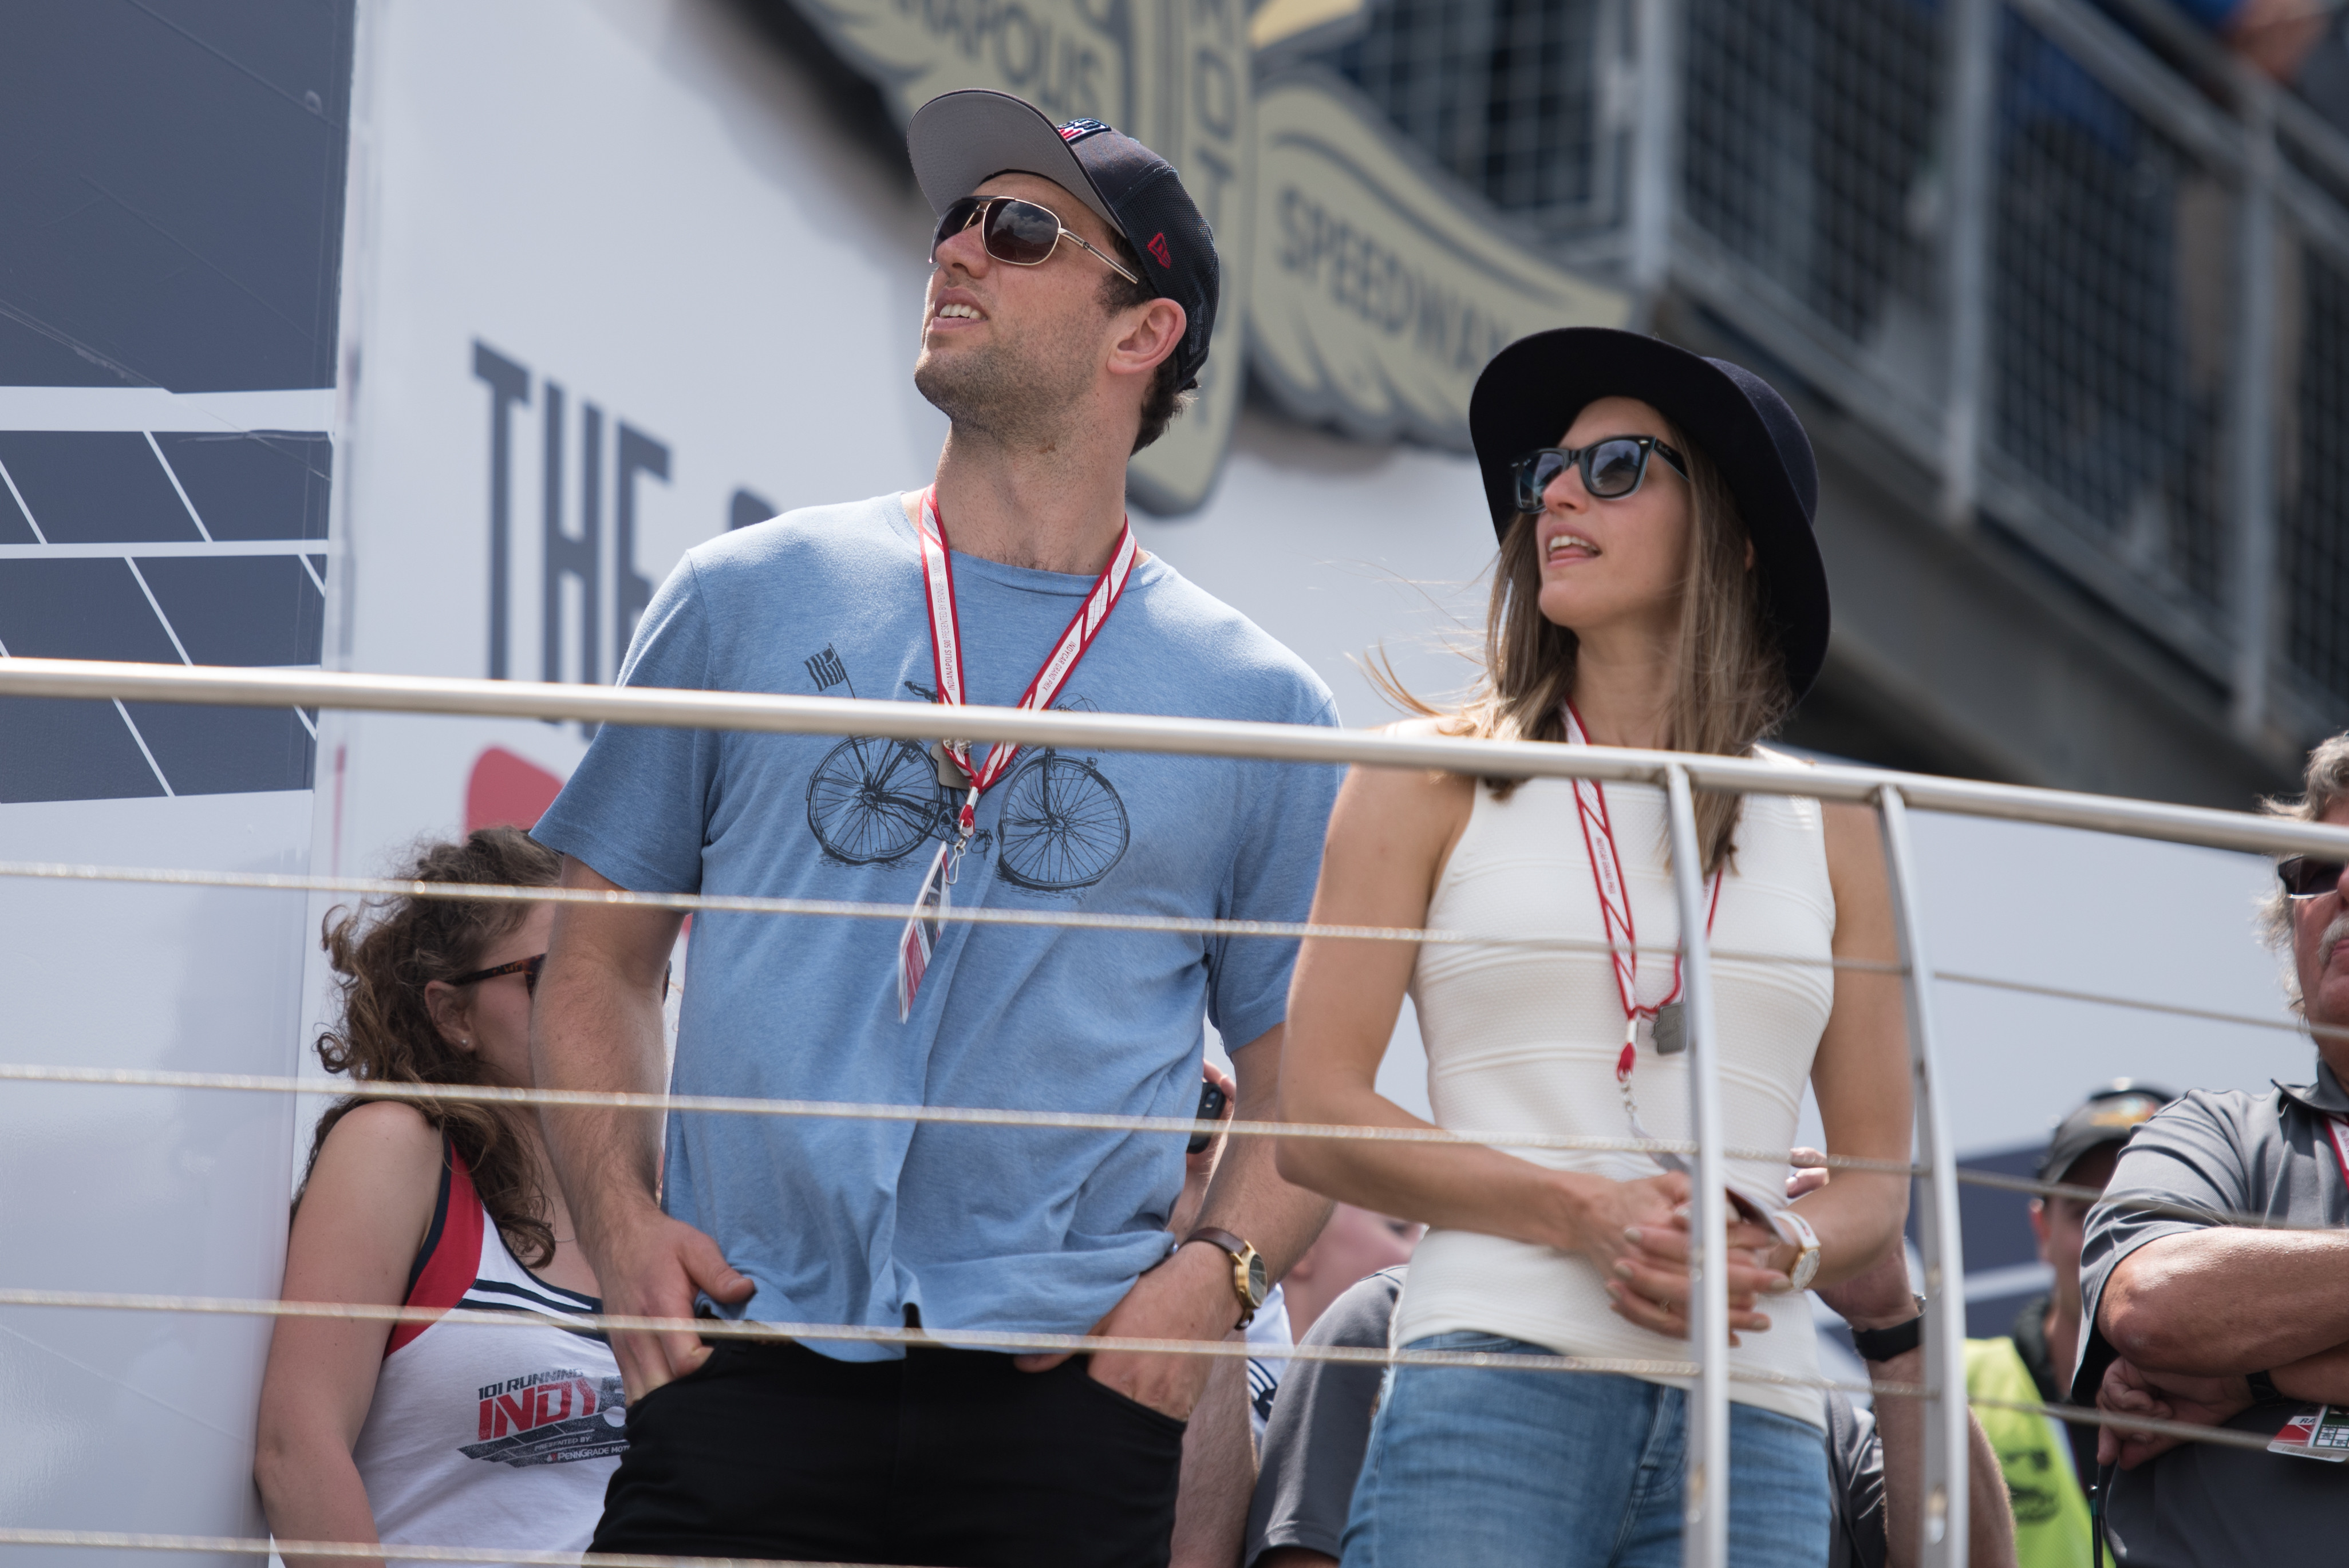 Andrew Luck with Nicole Pechanec prior to the 101st Indianapolis 500, on May 28, 2017, at the Indianapolis Motor Speedway in Indianapolis, Indiana. | Source: Getty Images